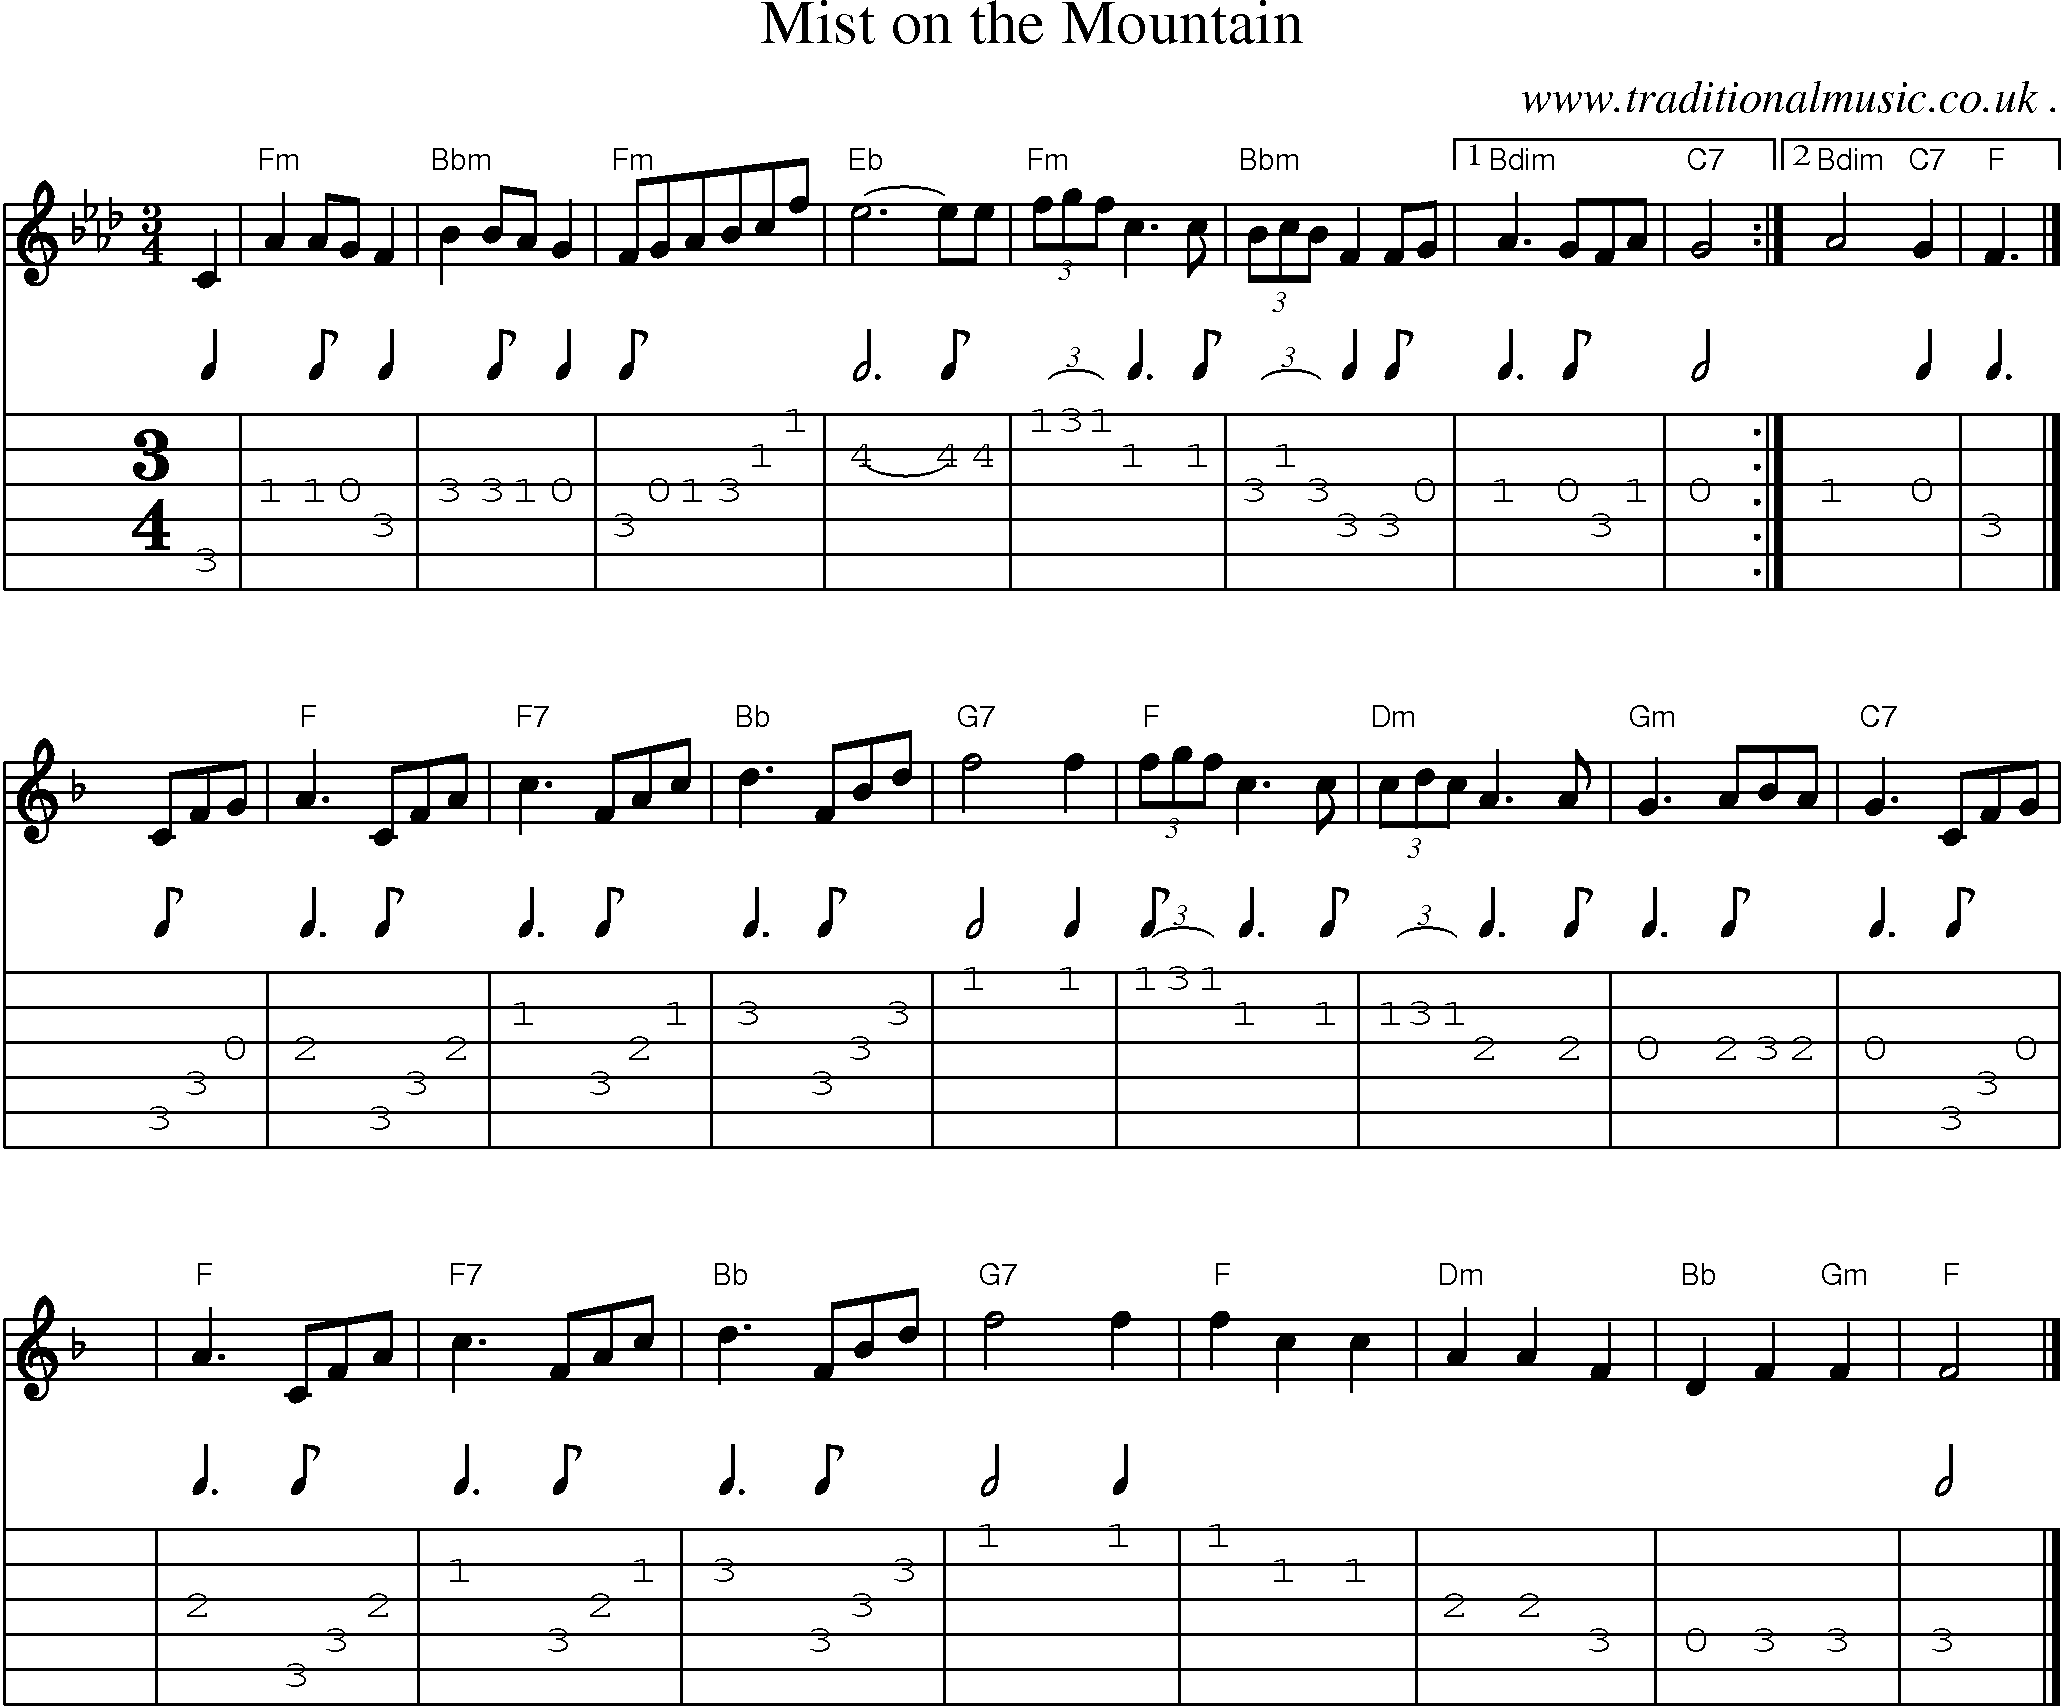 Sheet-music  score, Chords and Guitar Tabs for Mist On The Mountain